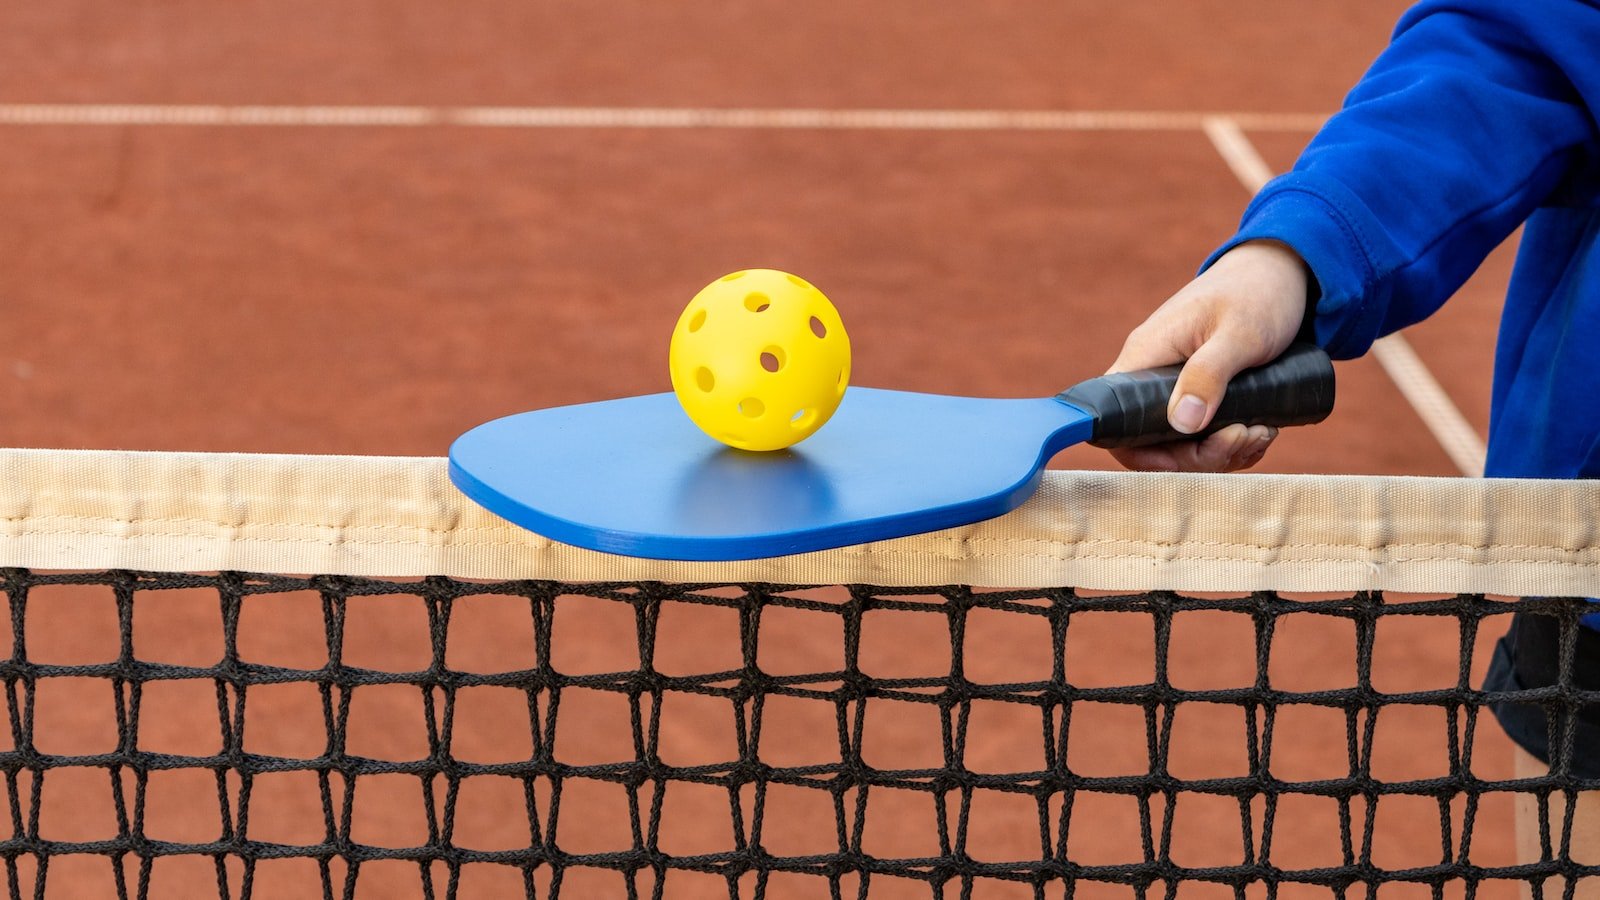 The Connection Between Pickleball and Social Media